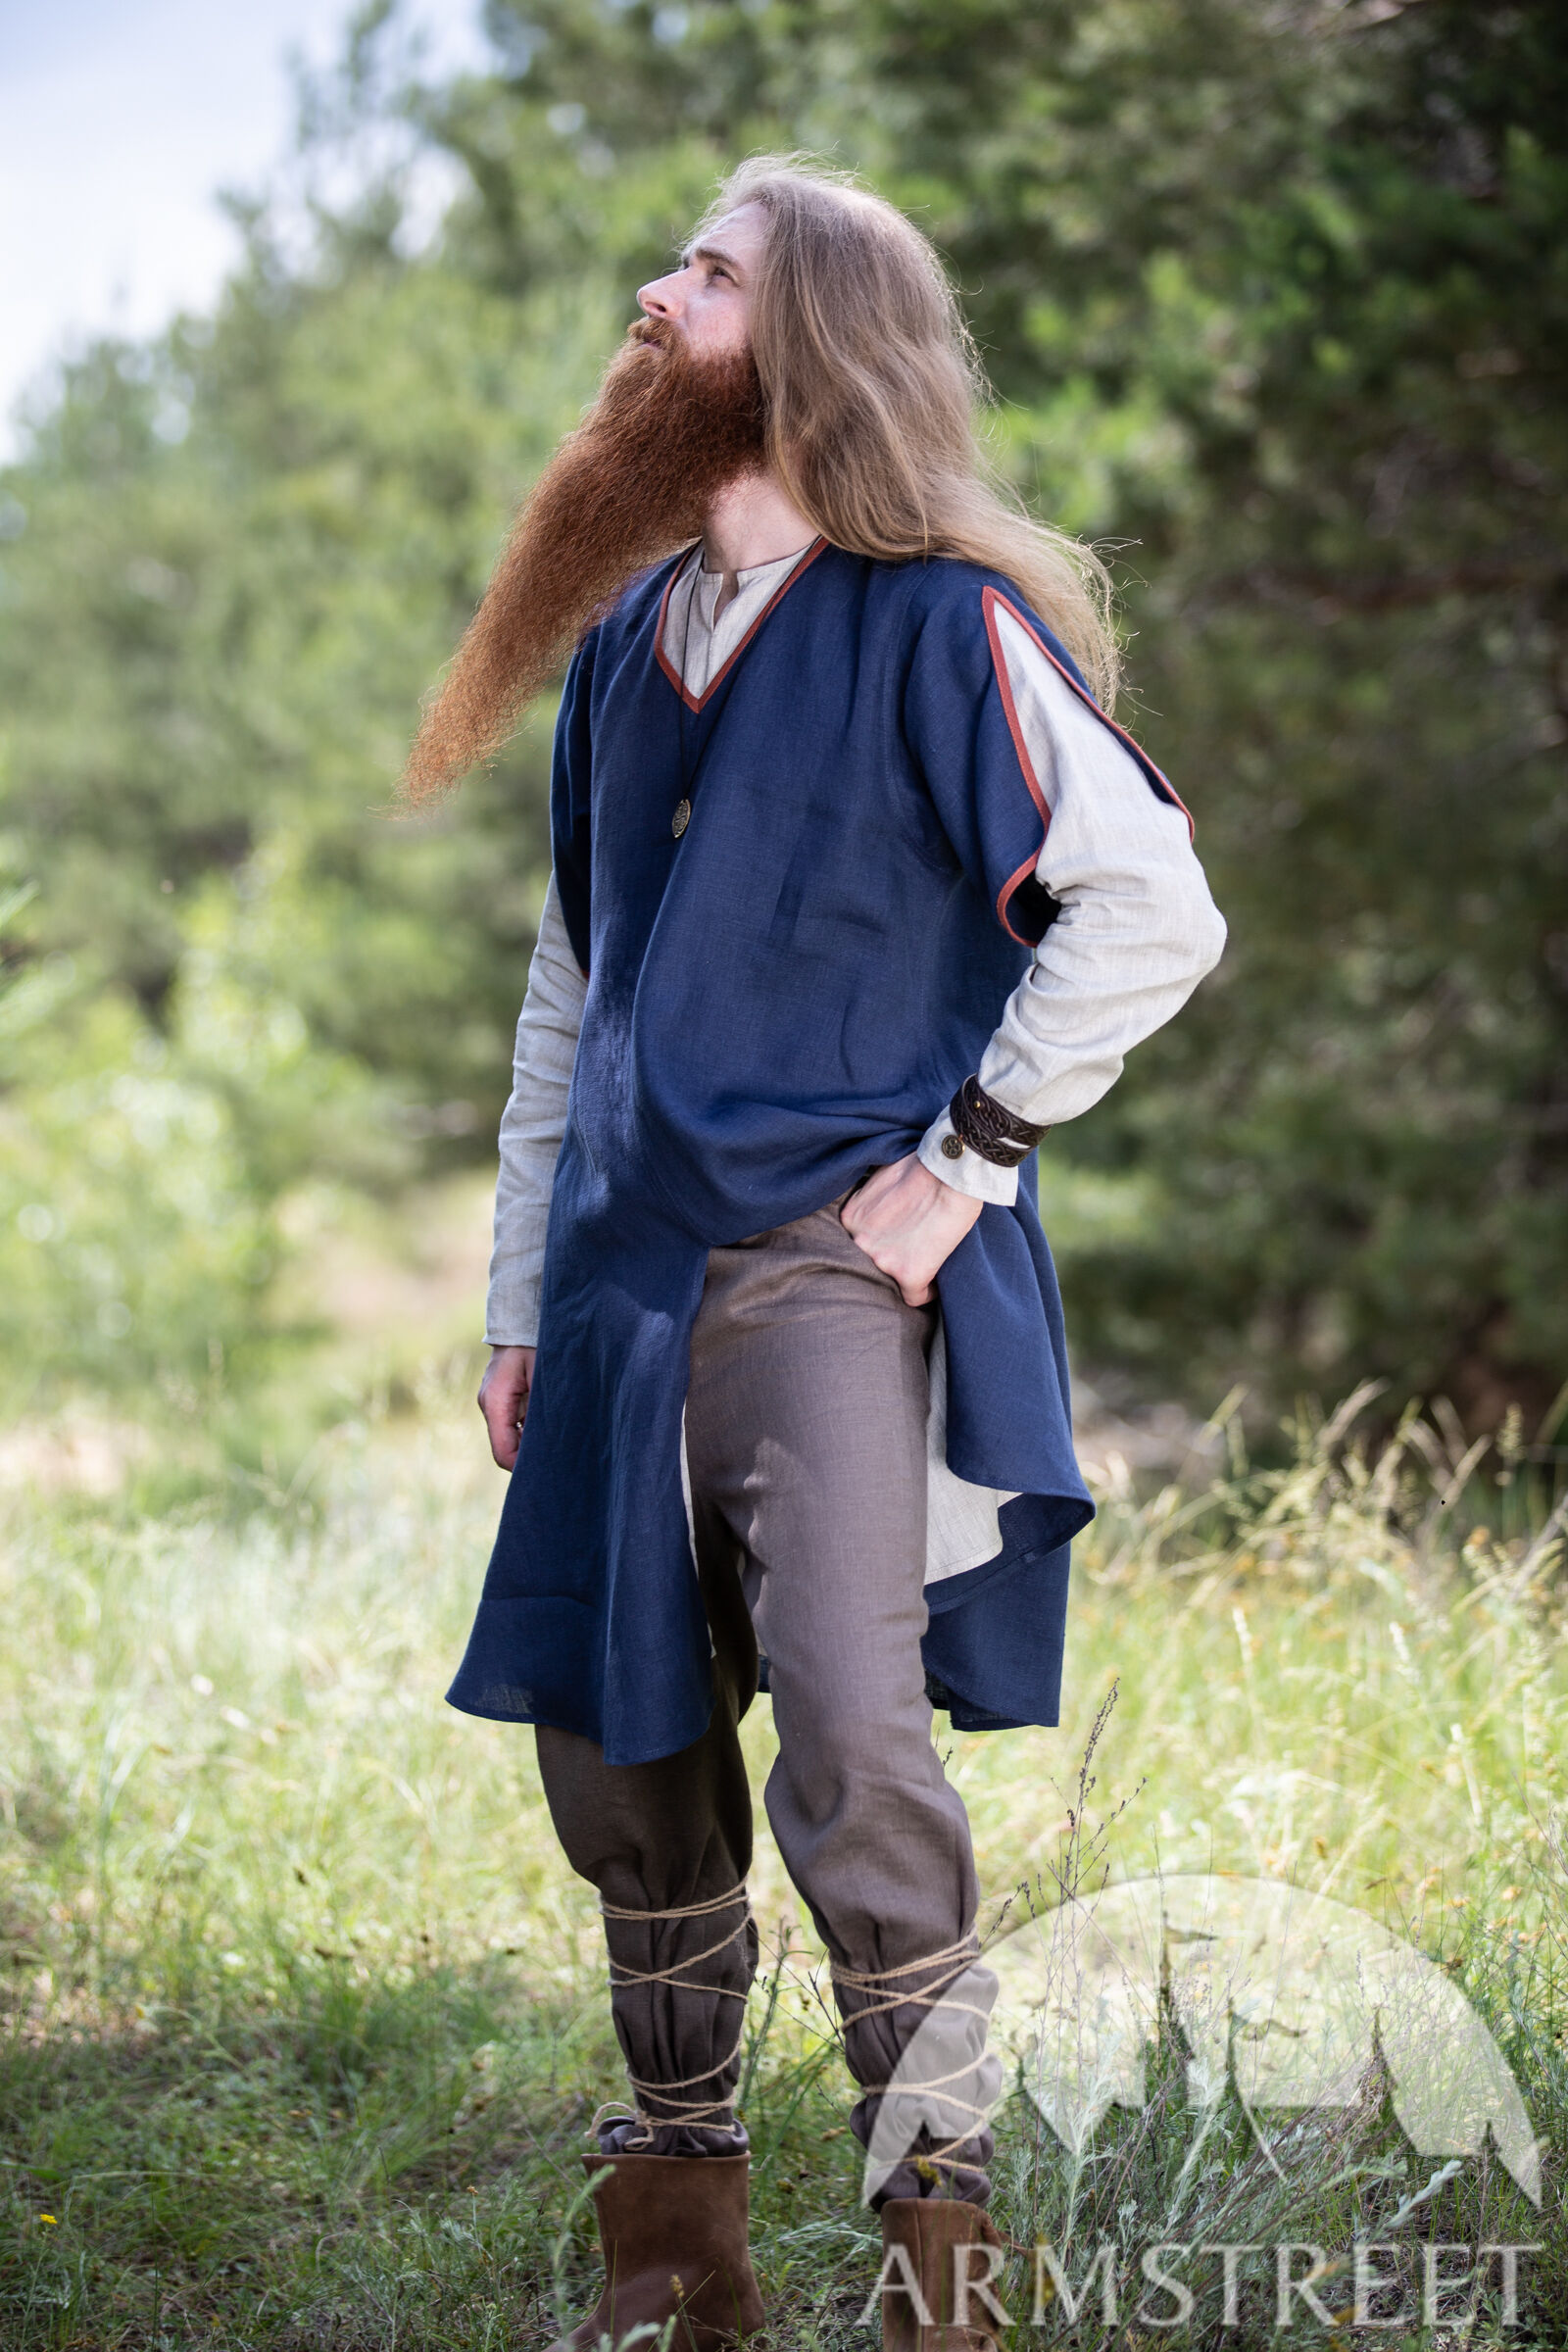 “Ulf the Watcher” set: undertunic and short-sleeved overtunic with accents